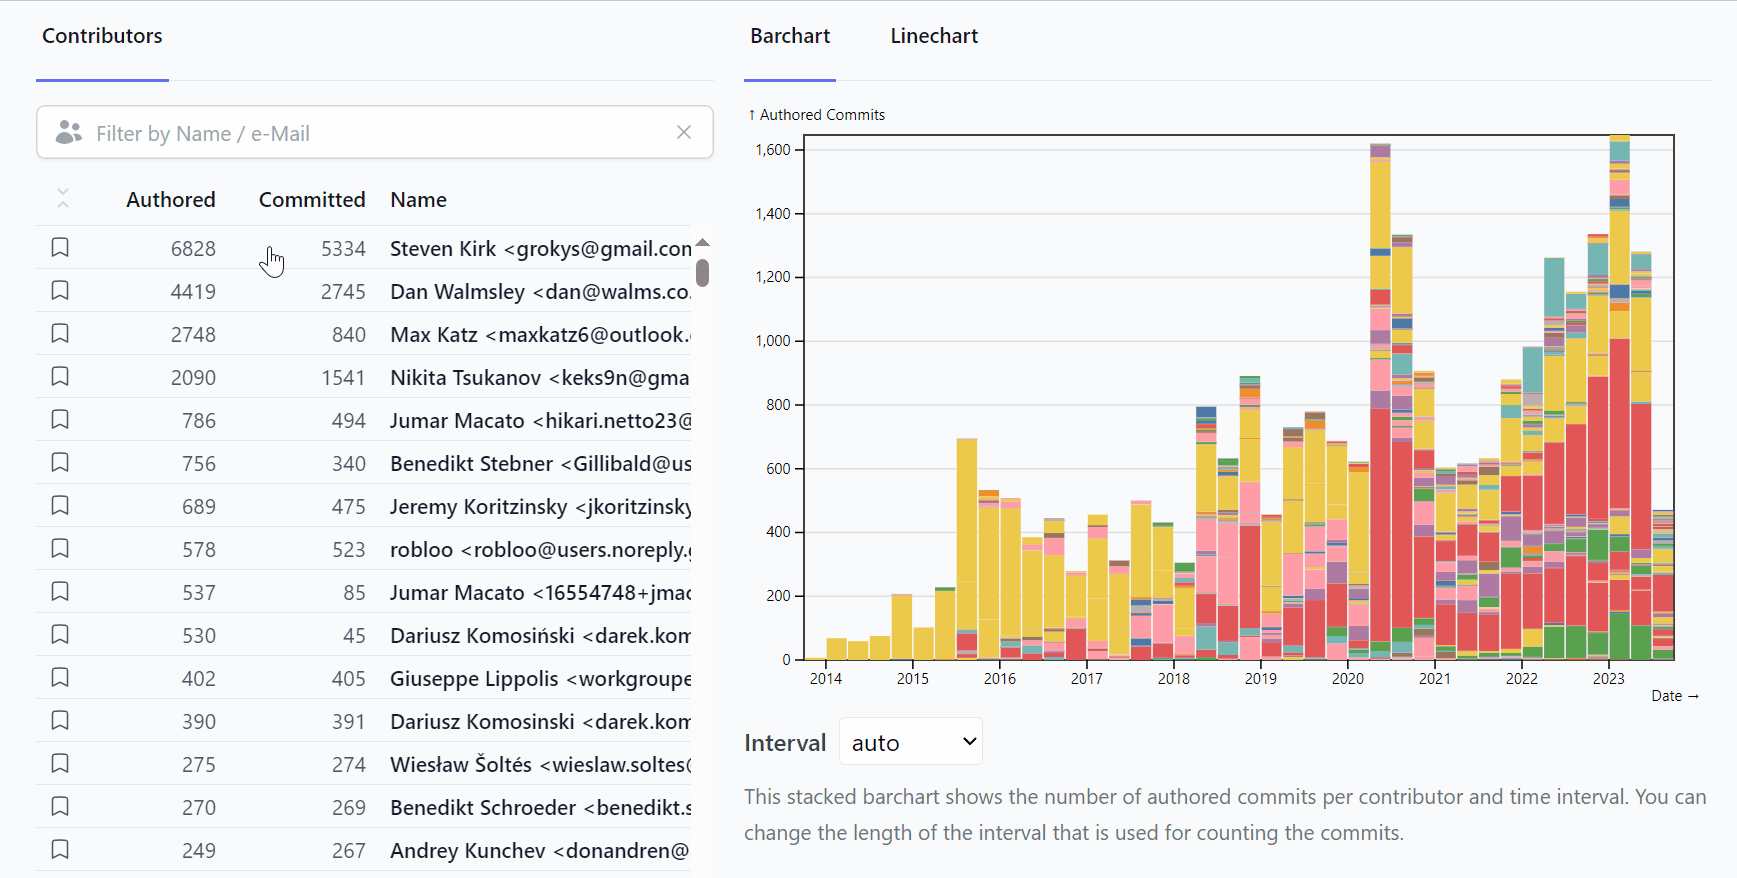 Animated gif that shows selecting a contributor highlights their contributions in the chart